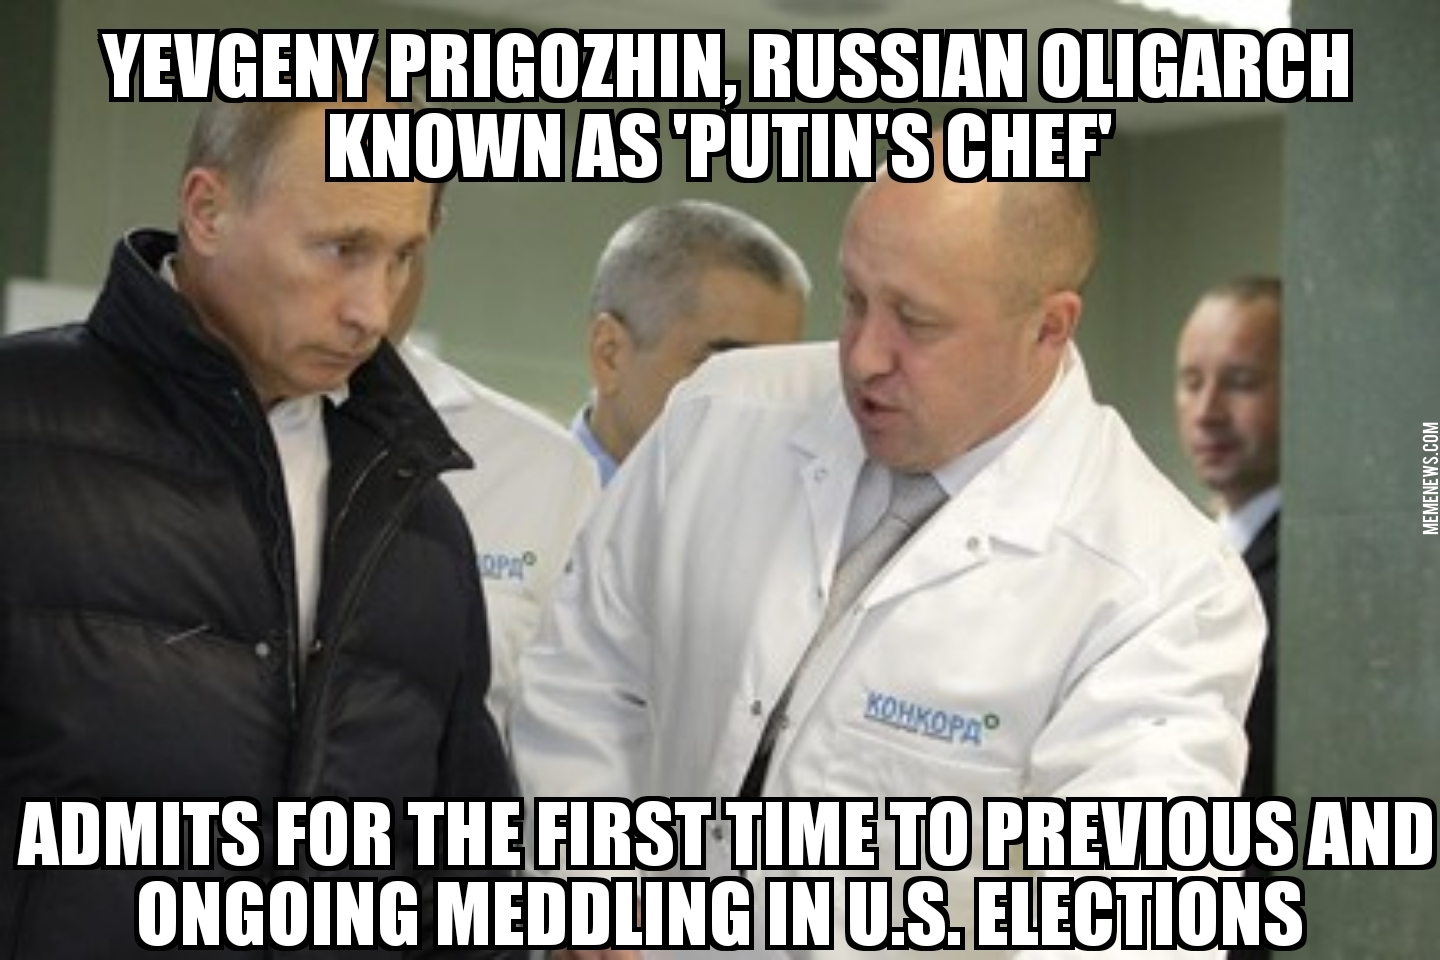 Putin’s chef admits to election meddling